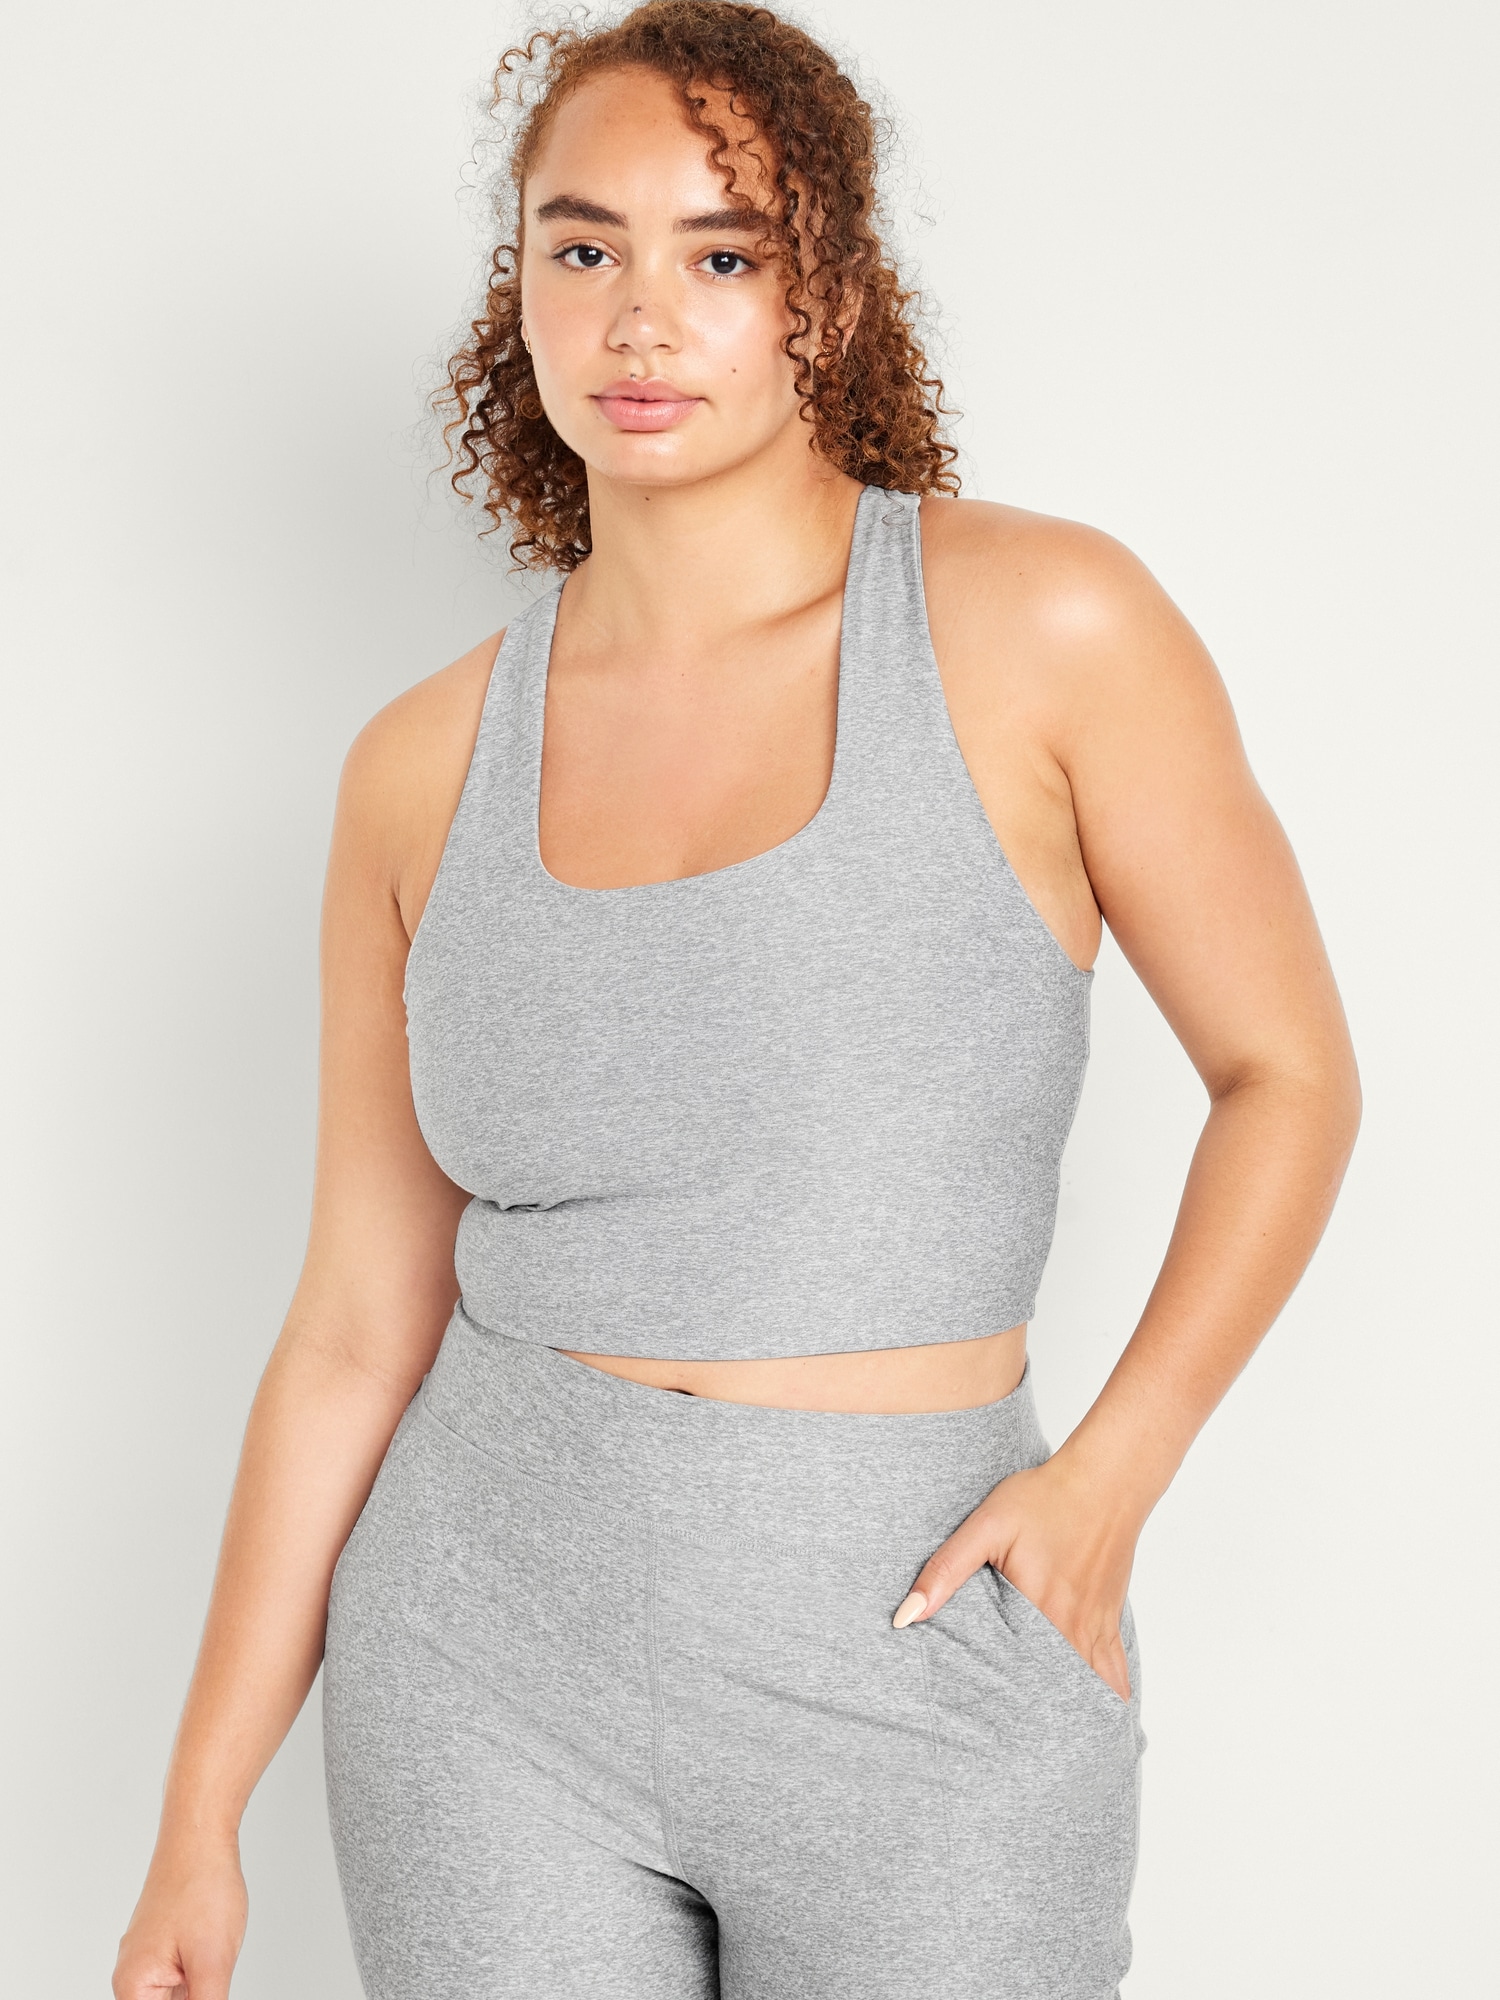 50% off Clear!Sports Bras for Women Casual and Comfortable Stretch